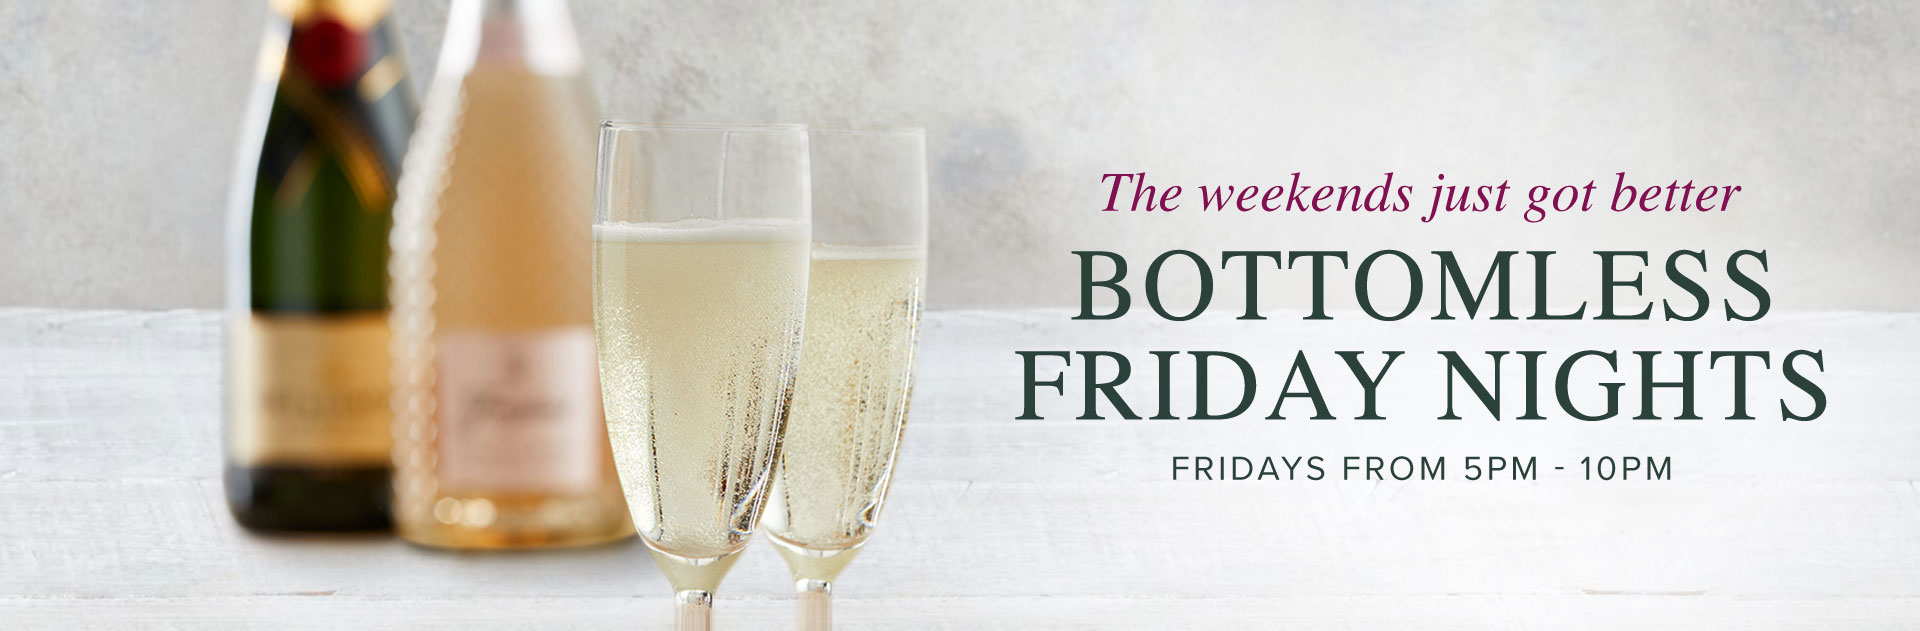 Bottomless Friday at The King William IV